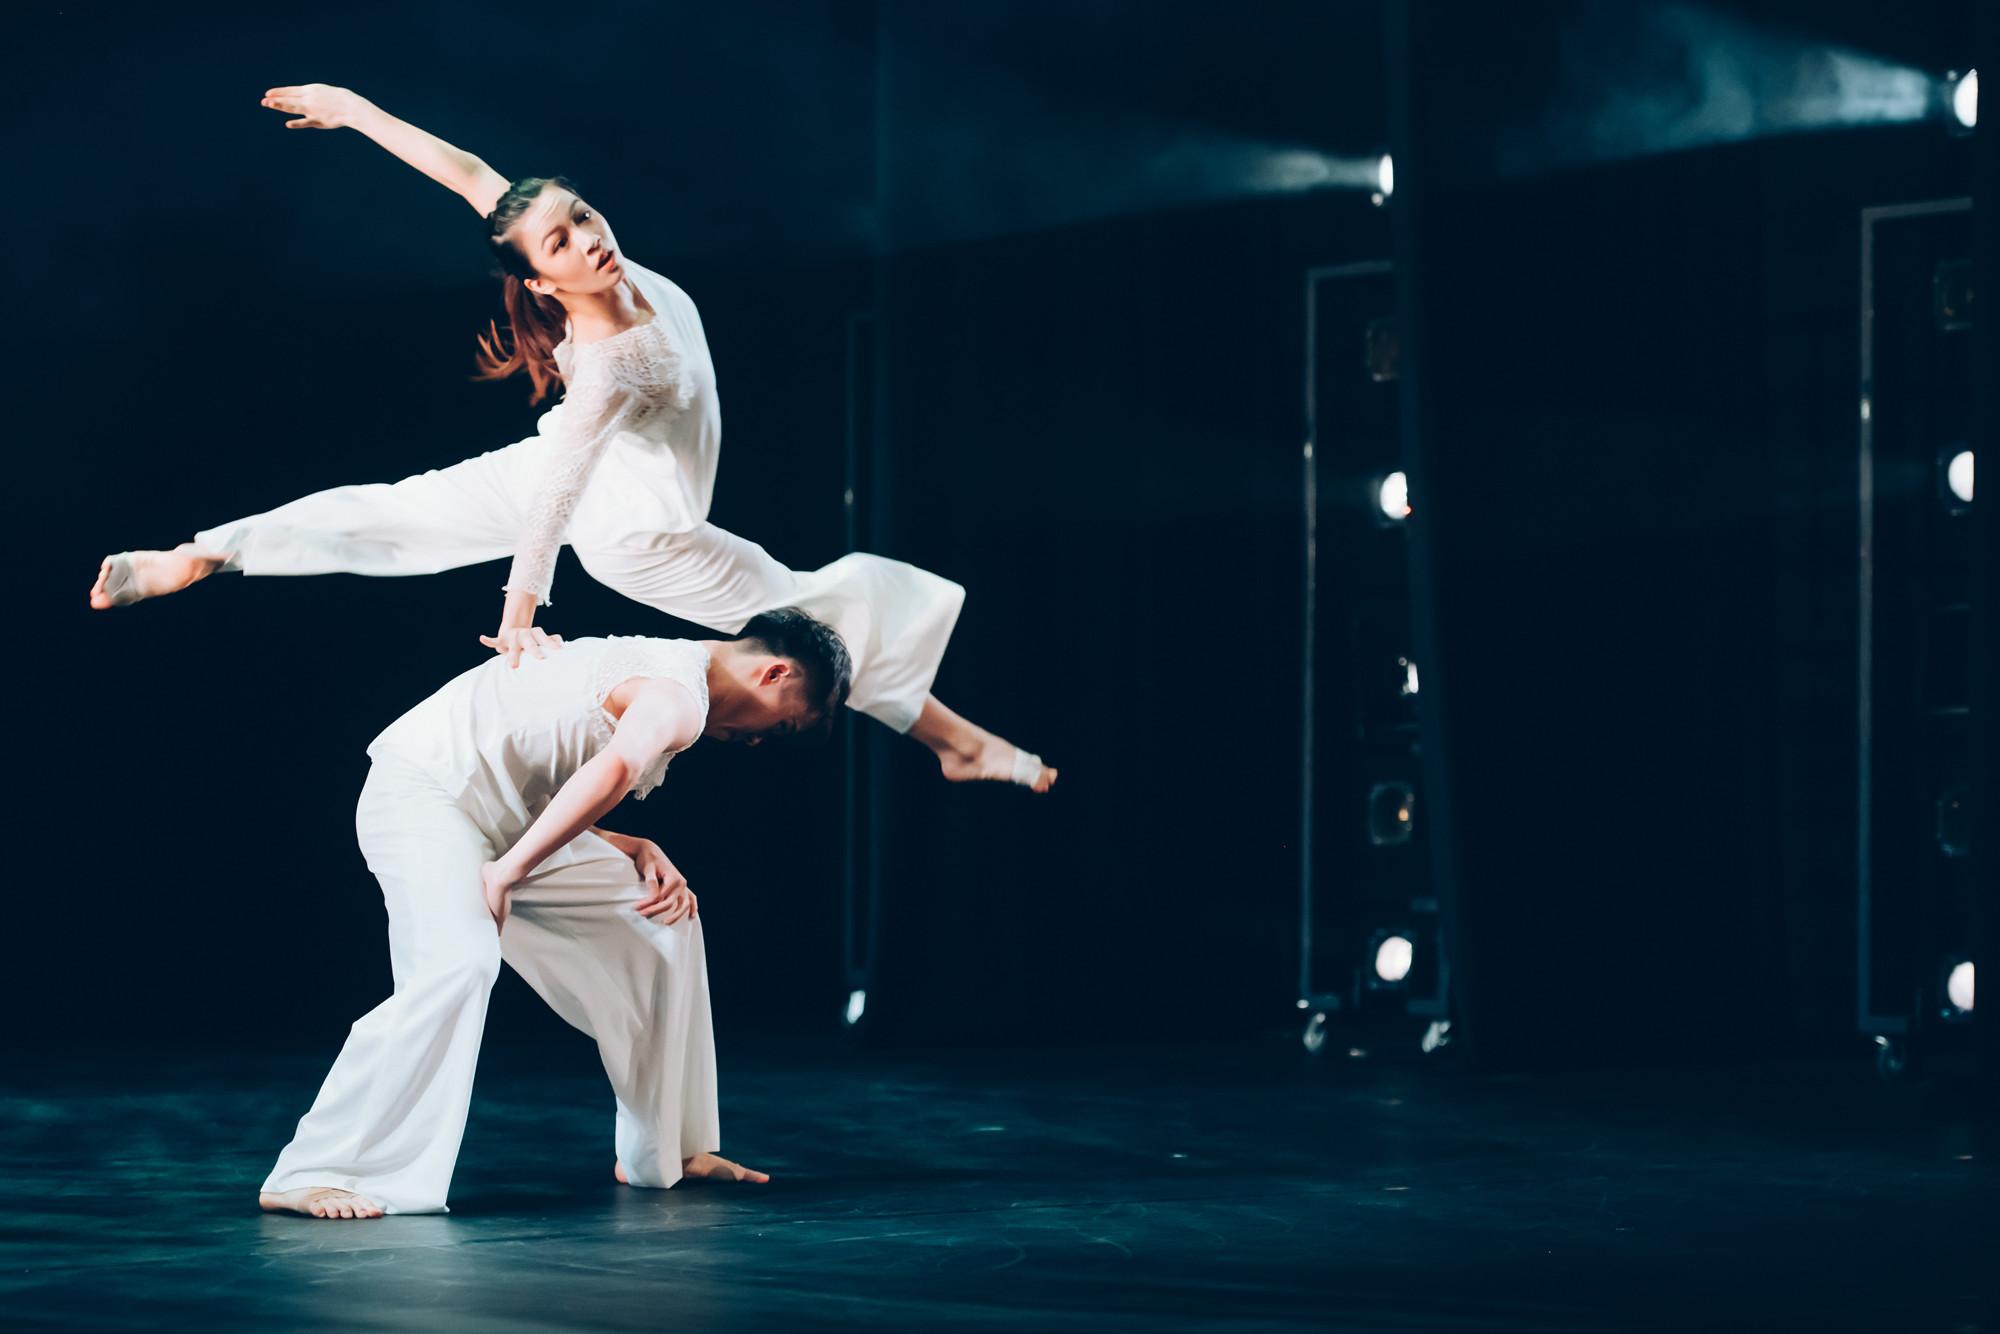 The Hong Kong Week@Wuhan, Hubei is held from today (February 15) to March 5 in Wuhan, Hubei Province in a hybrid mode. Photo shows "Dance/Connect" by the Hong Kong Academy for Performing Arts. (Source of photo: Liu Sheung Yin)　